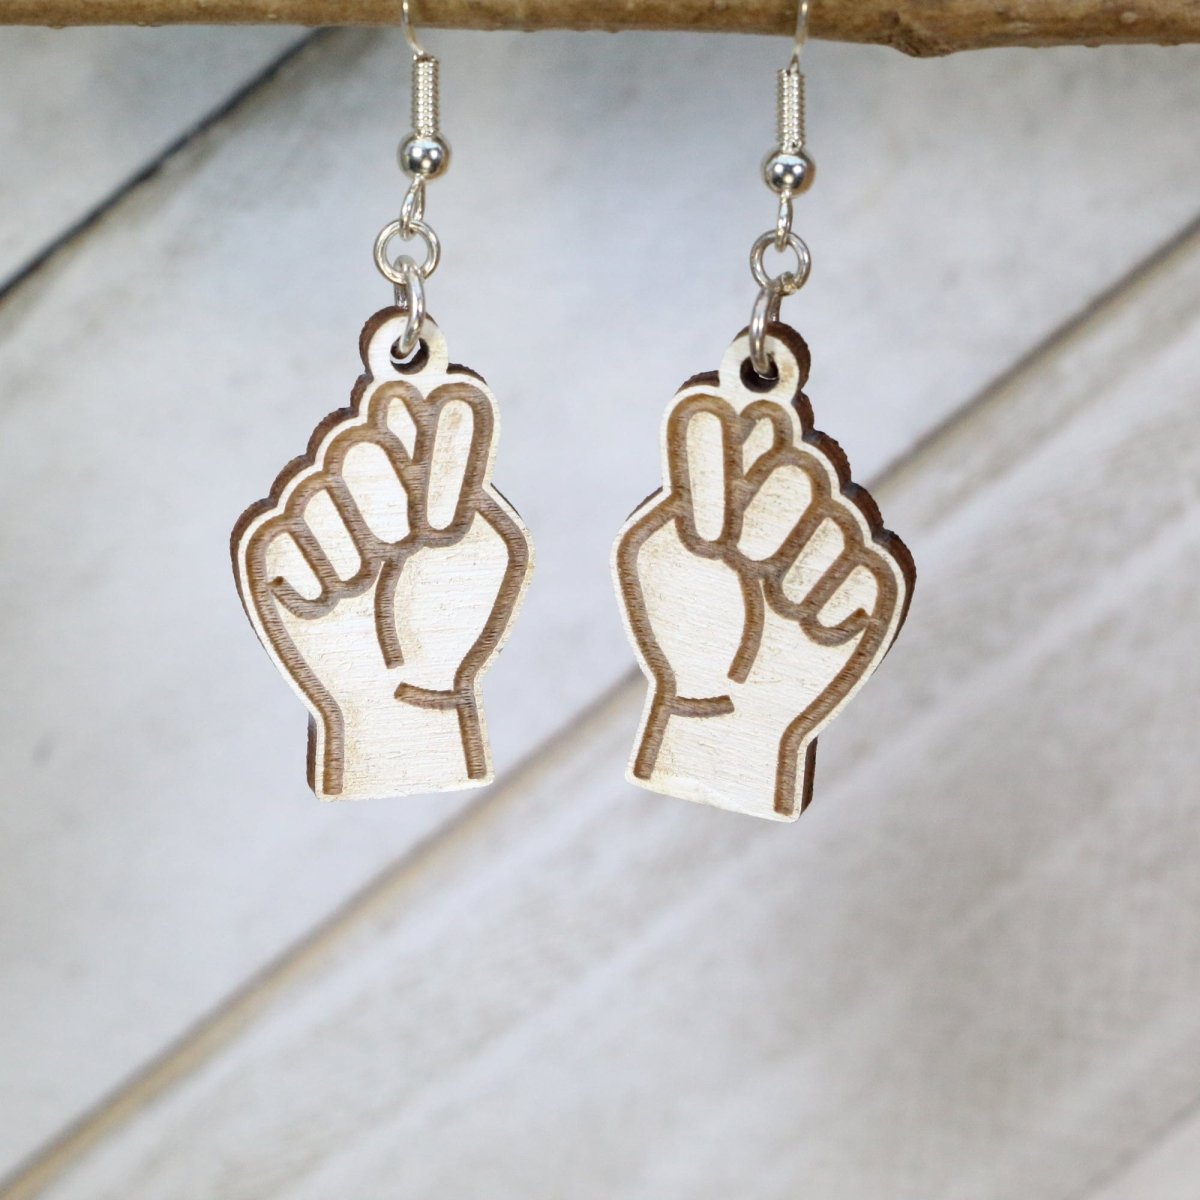 ASL Sign Language Bathroom Earrings - - Cate's Concepts, LLC